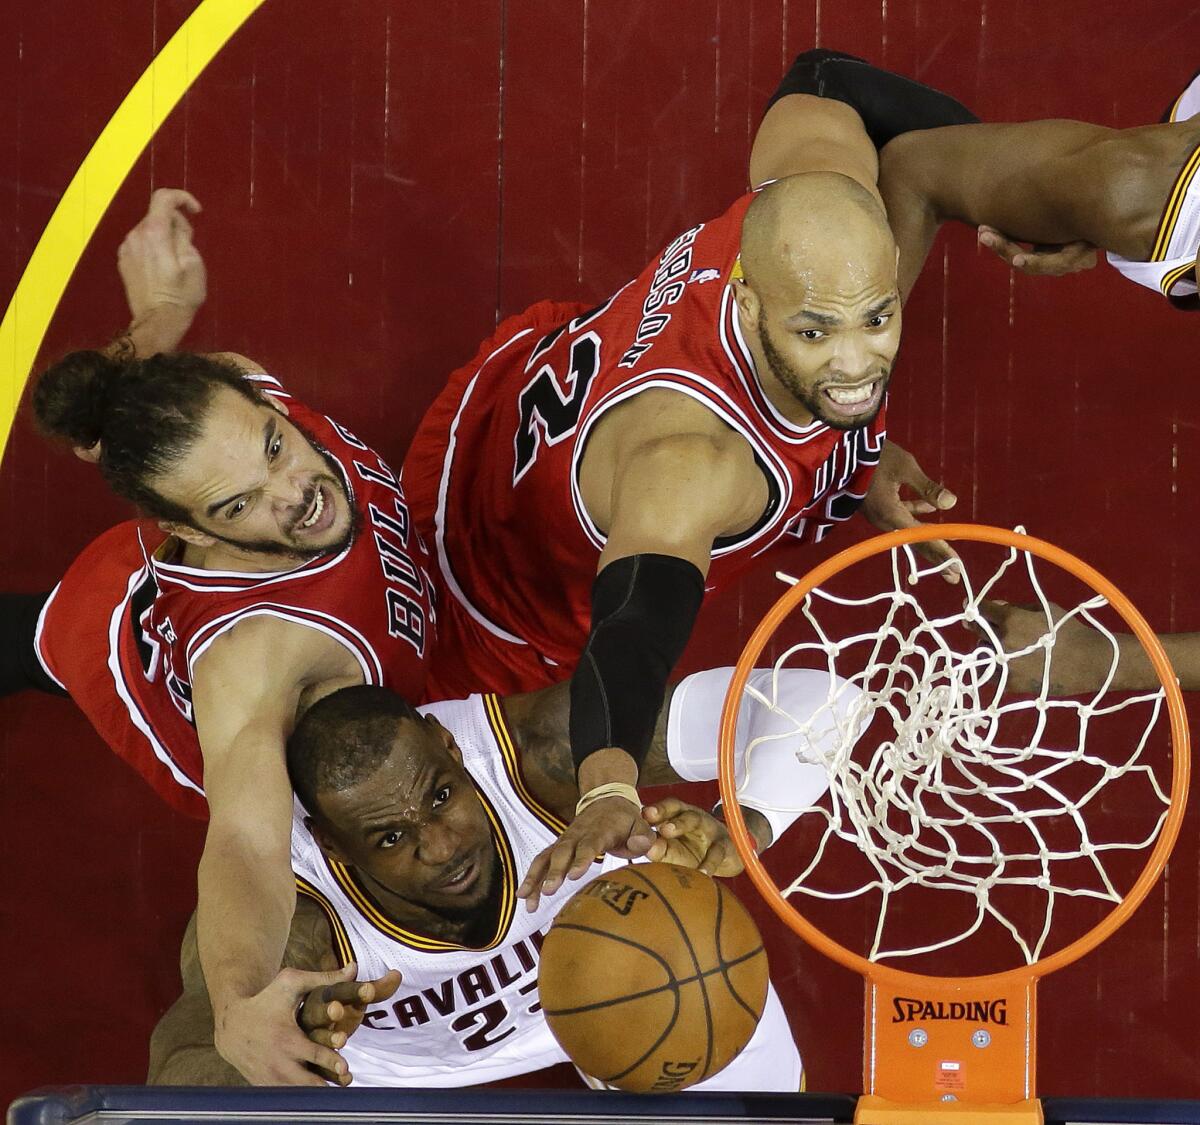 Bulls forwards Joakim Noah, left, and Taj Gibson, right, battle for a rebound under the basket with Cavaliers forward LeBron James during Game 1.